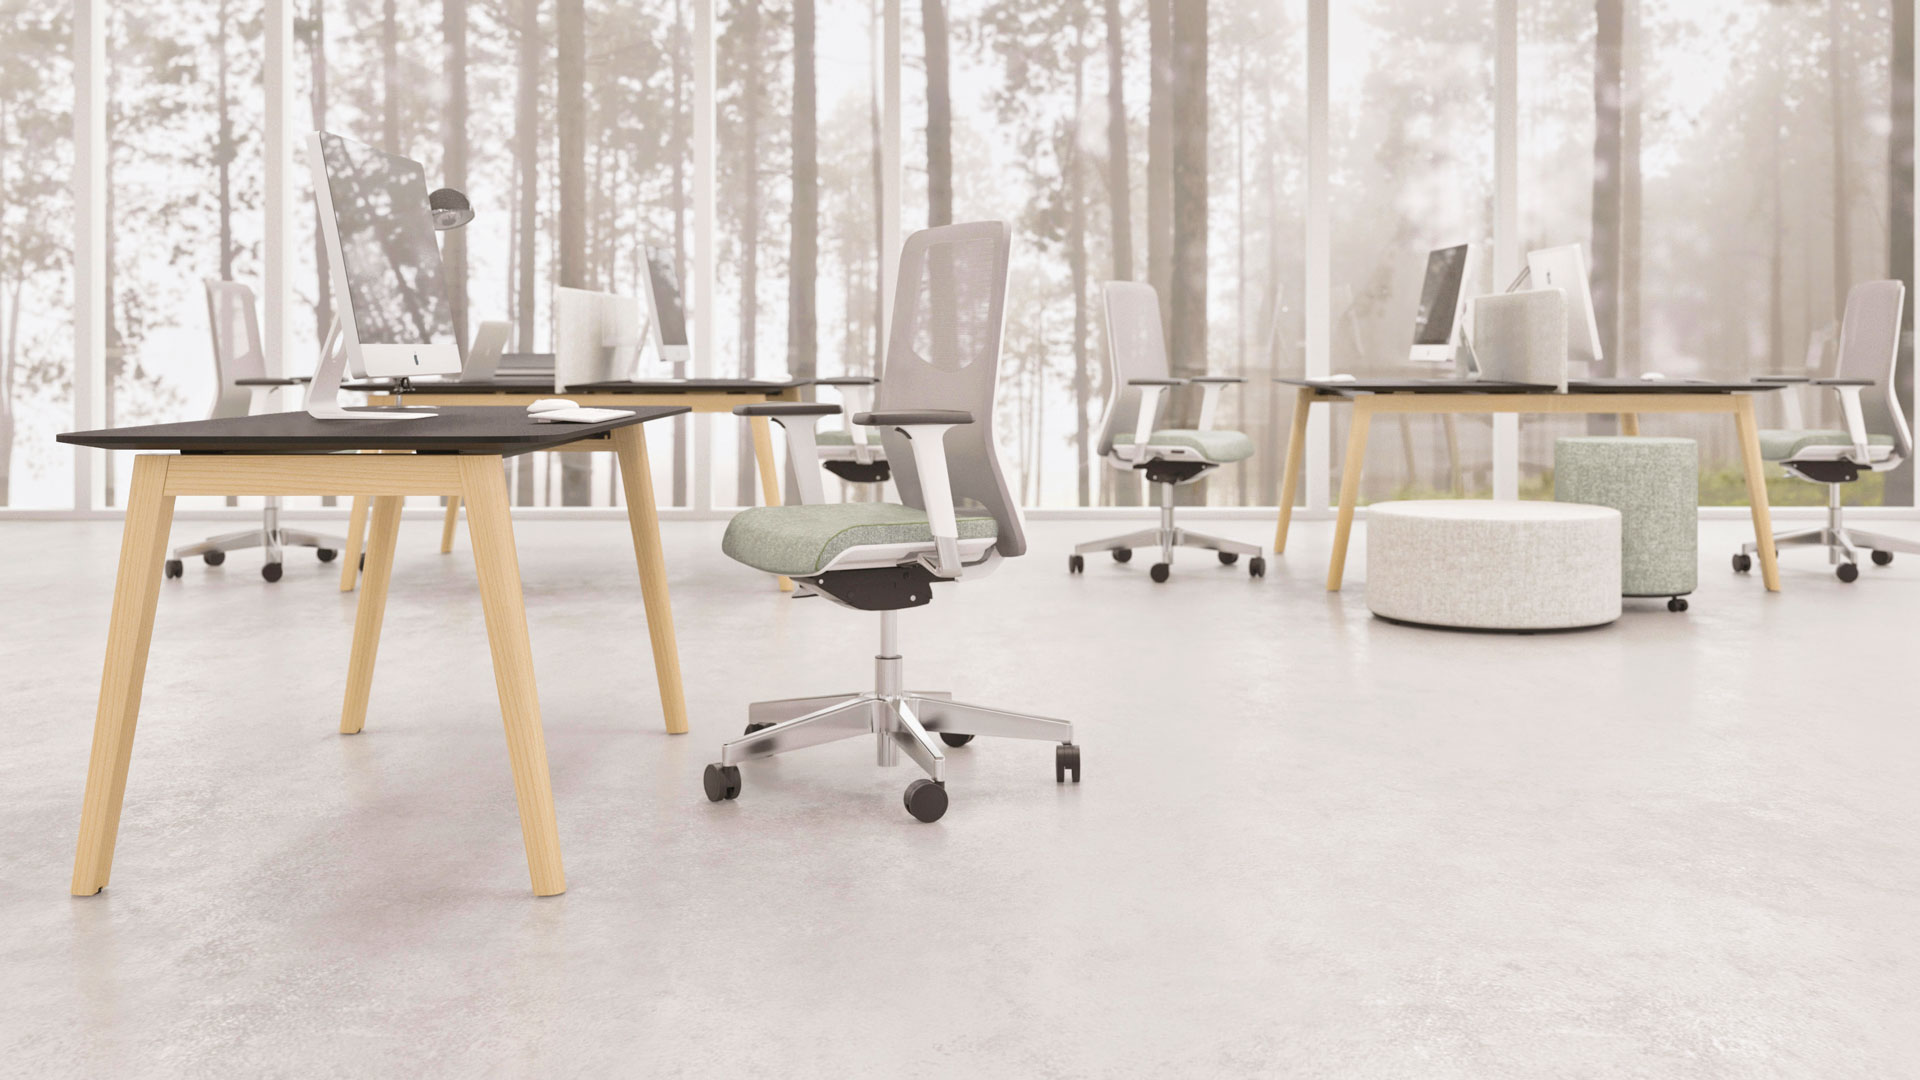 With rounded corners and a tapered edge Nova Wood works beautifully as a single desk or bench desk